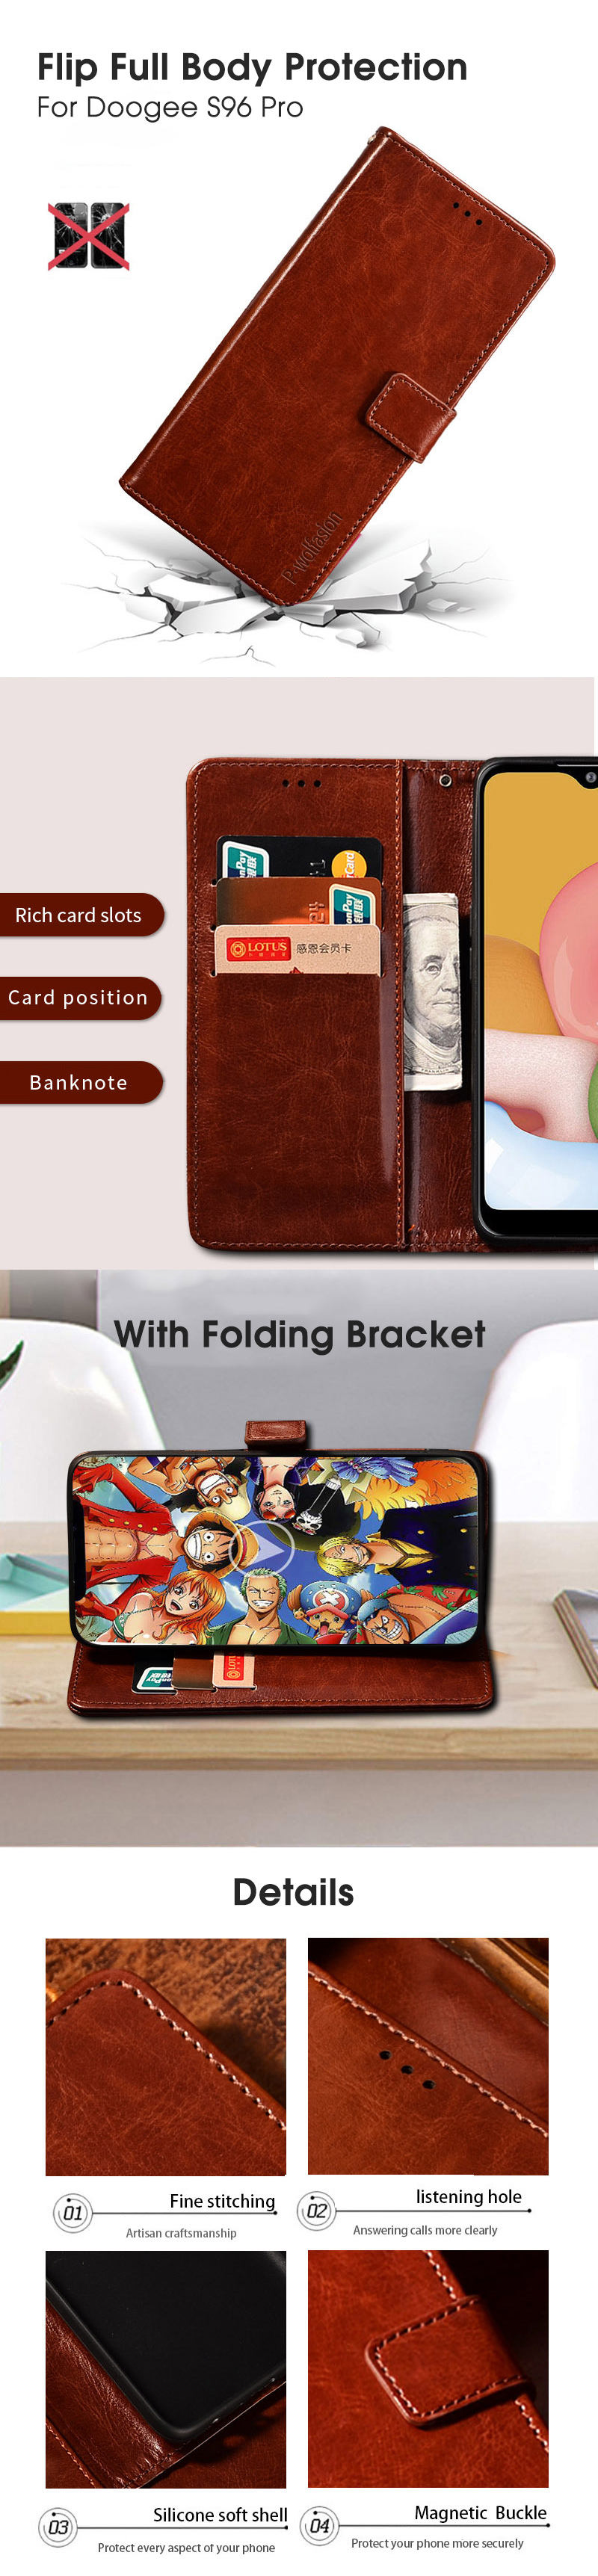 Bakeey-for-Doogee-S96-Pro-Case-Magnetic-Flip-with-Multiple-Card-Slot-Foldable-Stand-PU-Leather-Shock-1832818-1